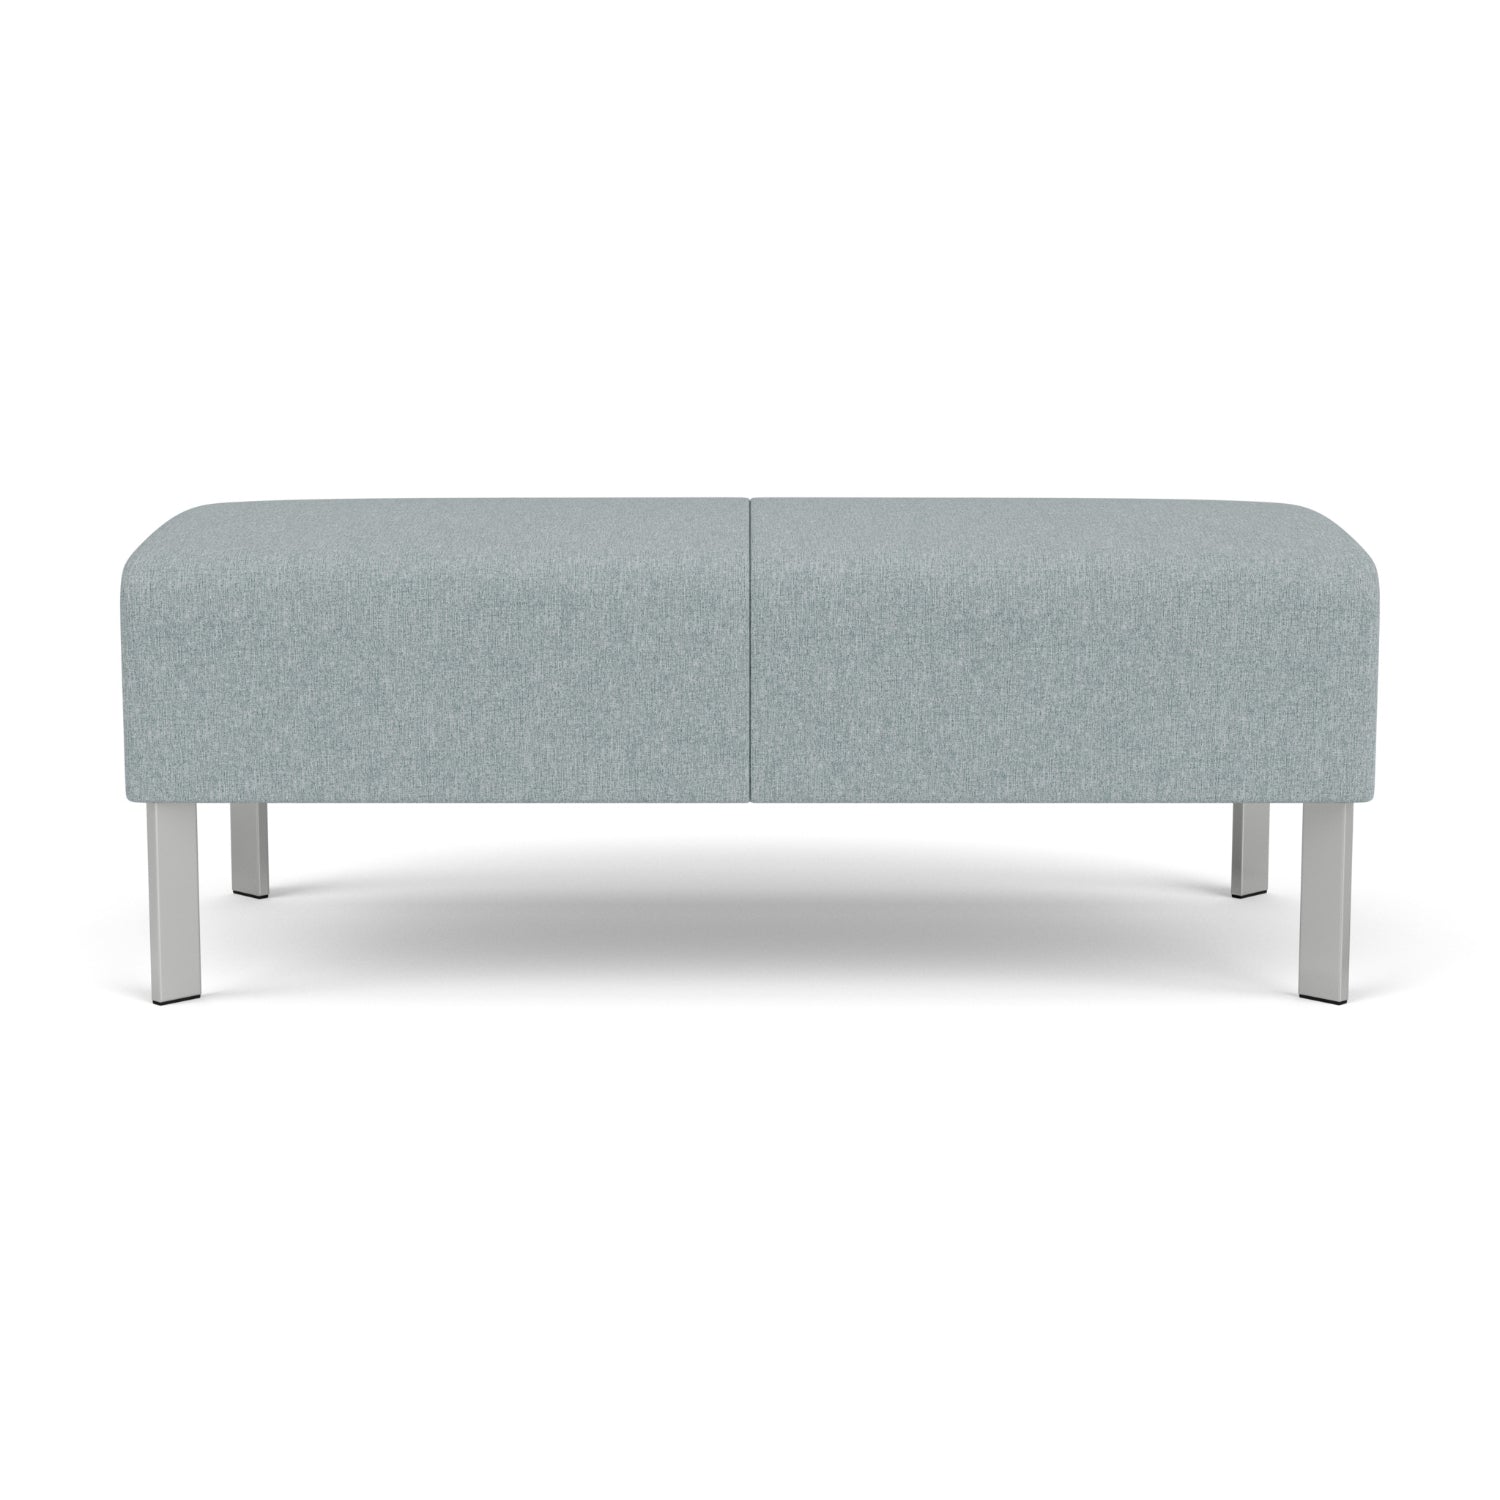 Luxe Collection Reception Seating, 2 Seat Bench, Healthcare Vinyl Upholstery, FREE SHIPPING